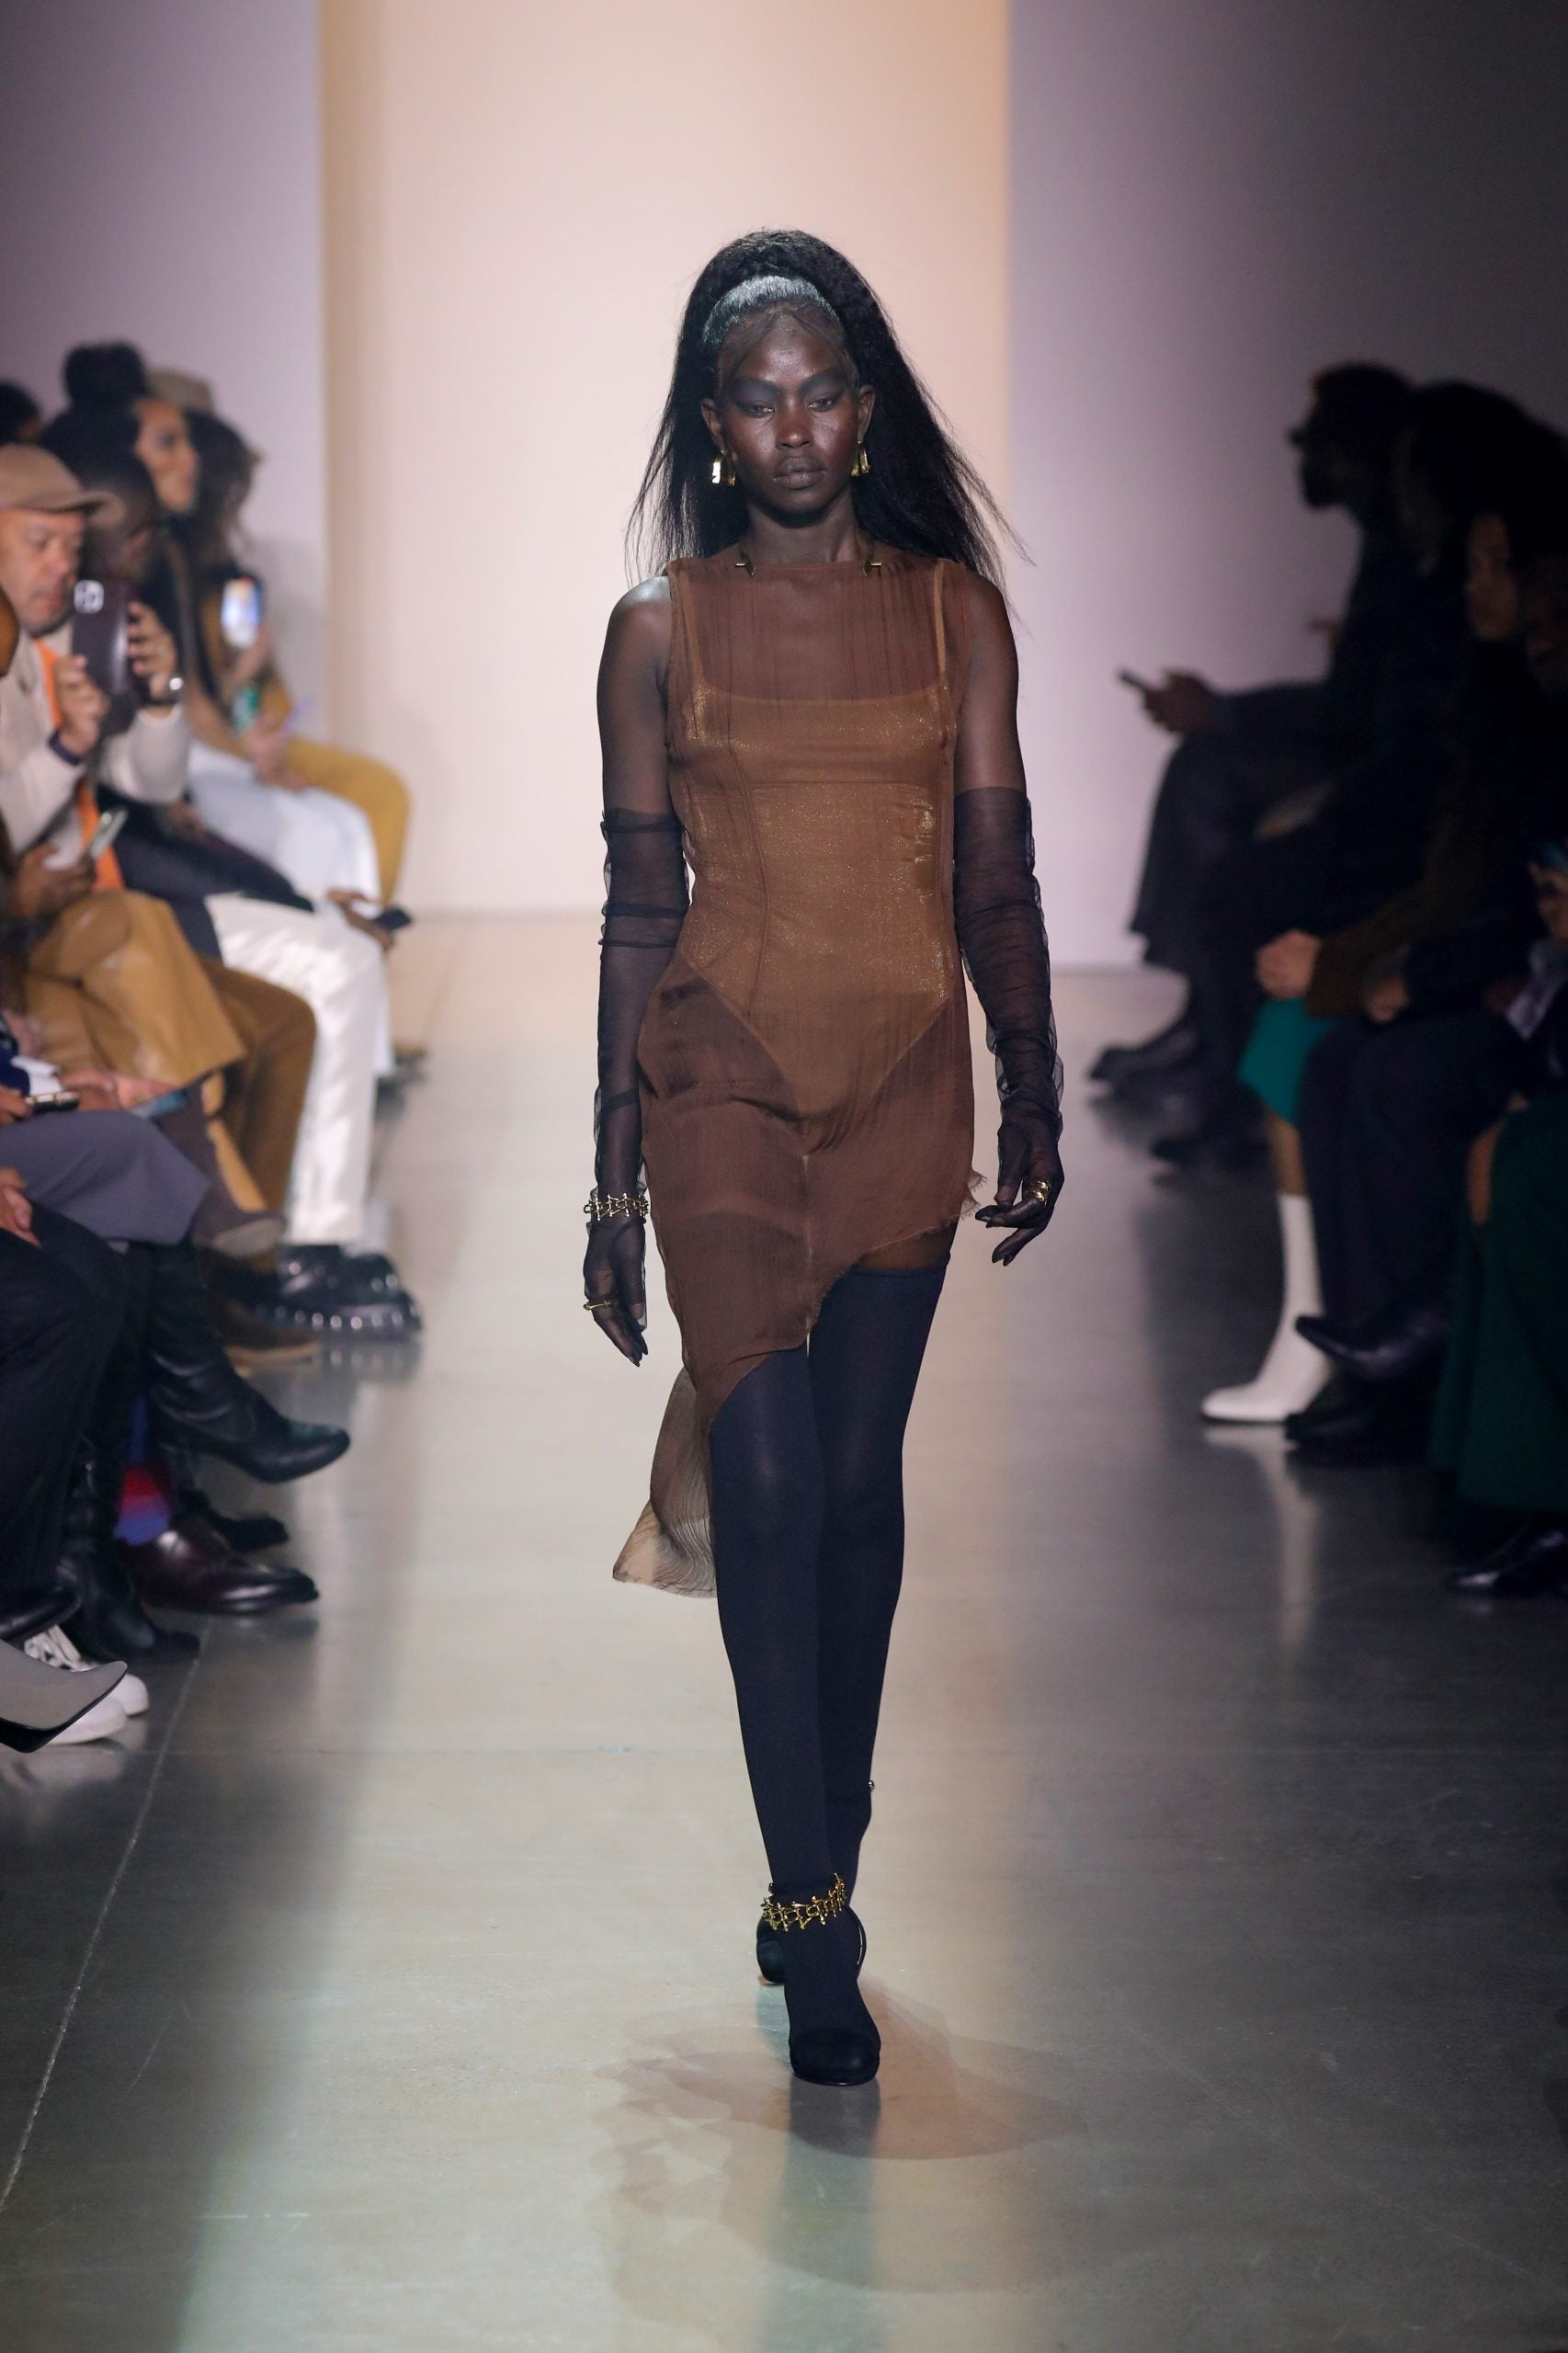 IN THE BLK Spotlights KHIRY, House of Aama And Third Crown At NYFW